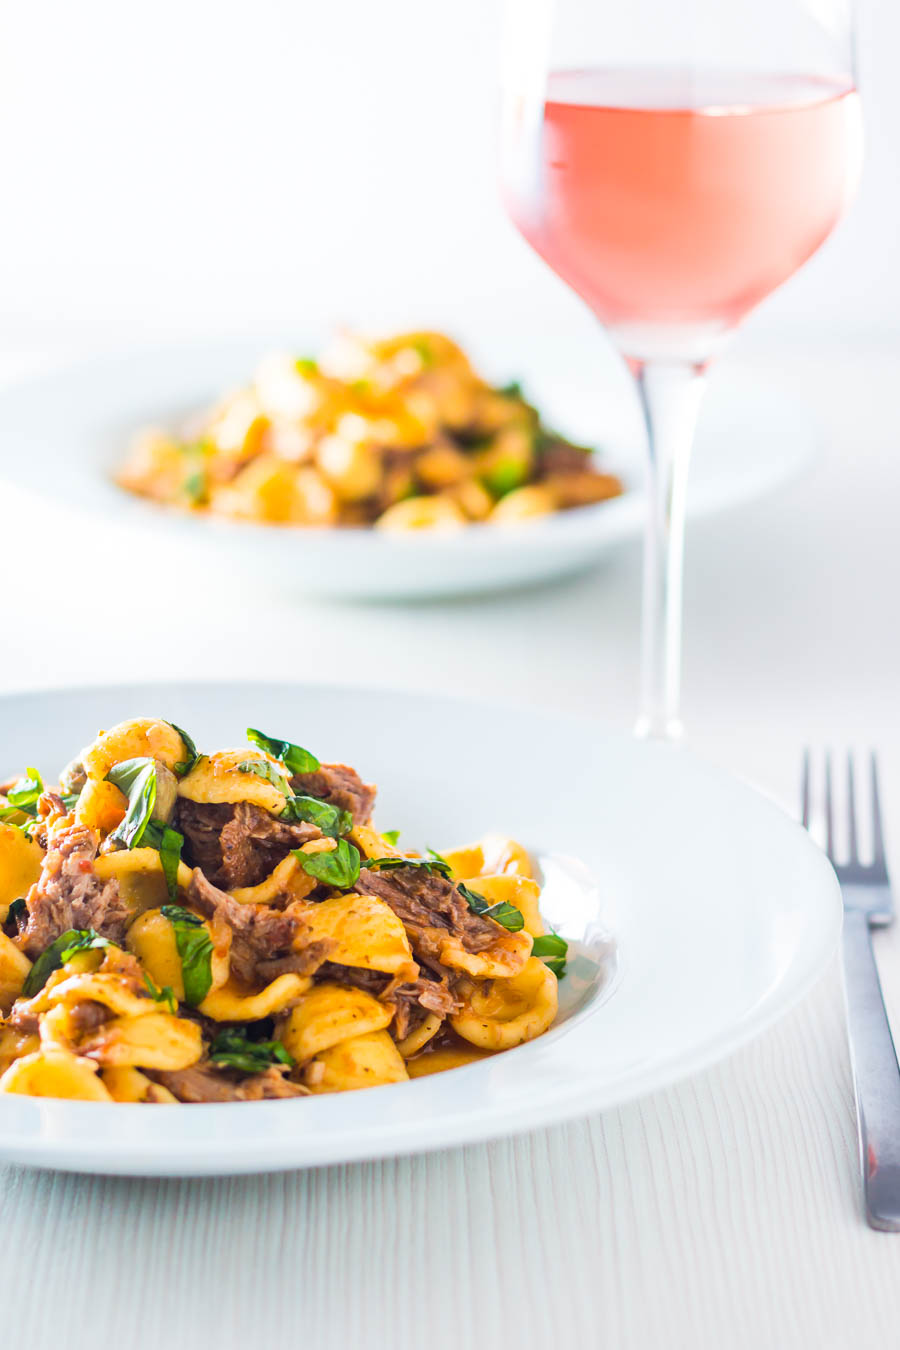 Pork Ragu that tastes like it has been slow cooked for 24 hours in an hour or so thanks to the Instant Pot served with hearty Orecchiette Pasta.